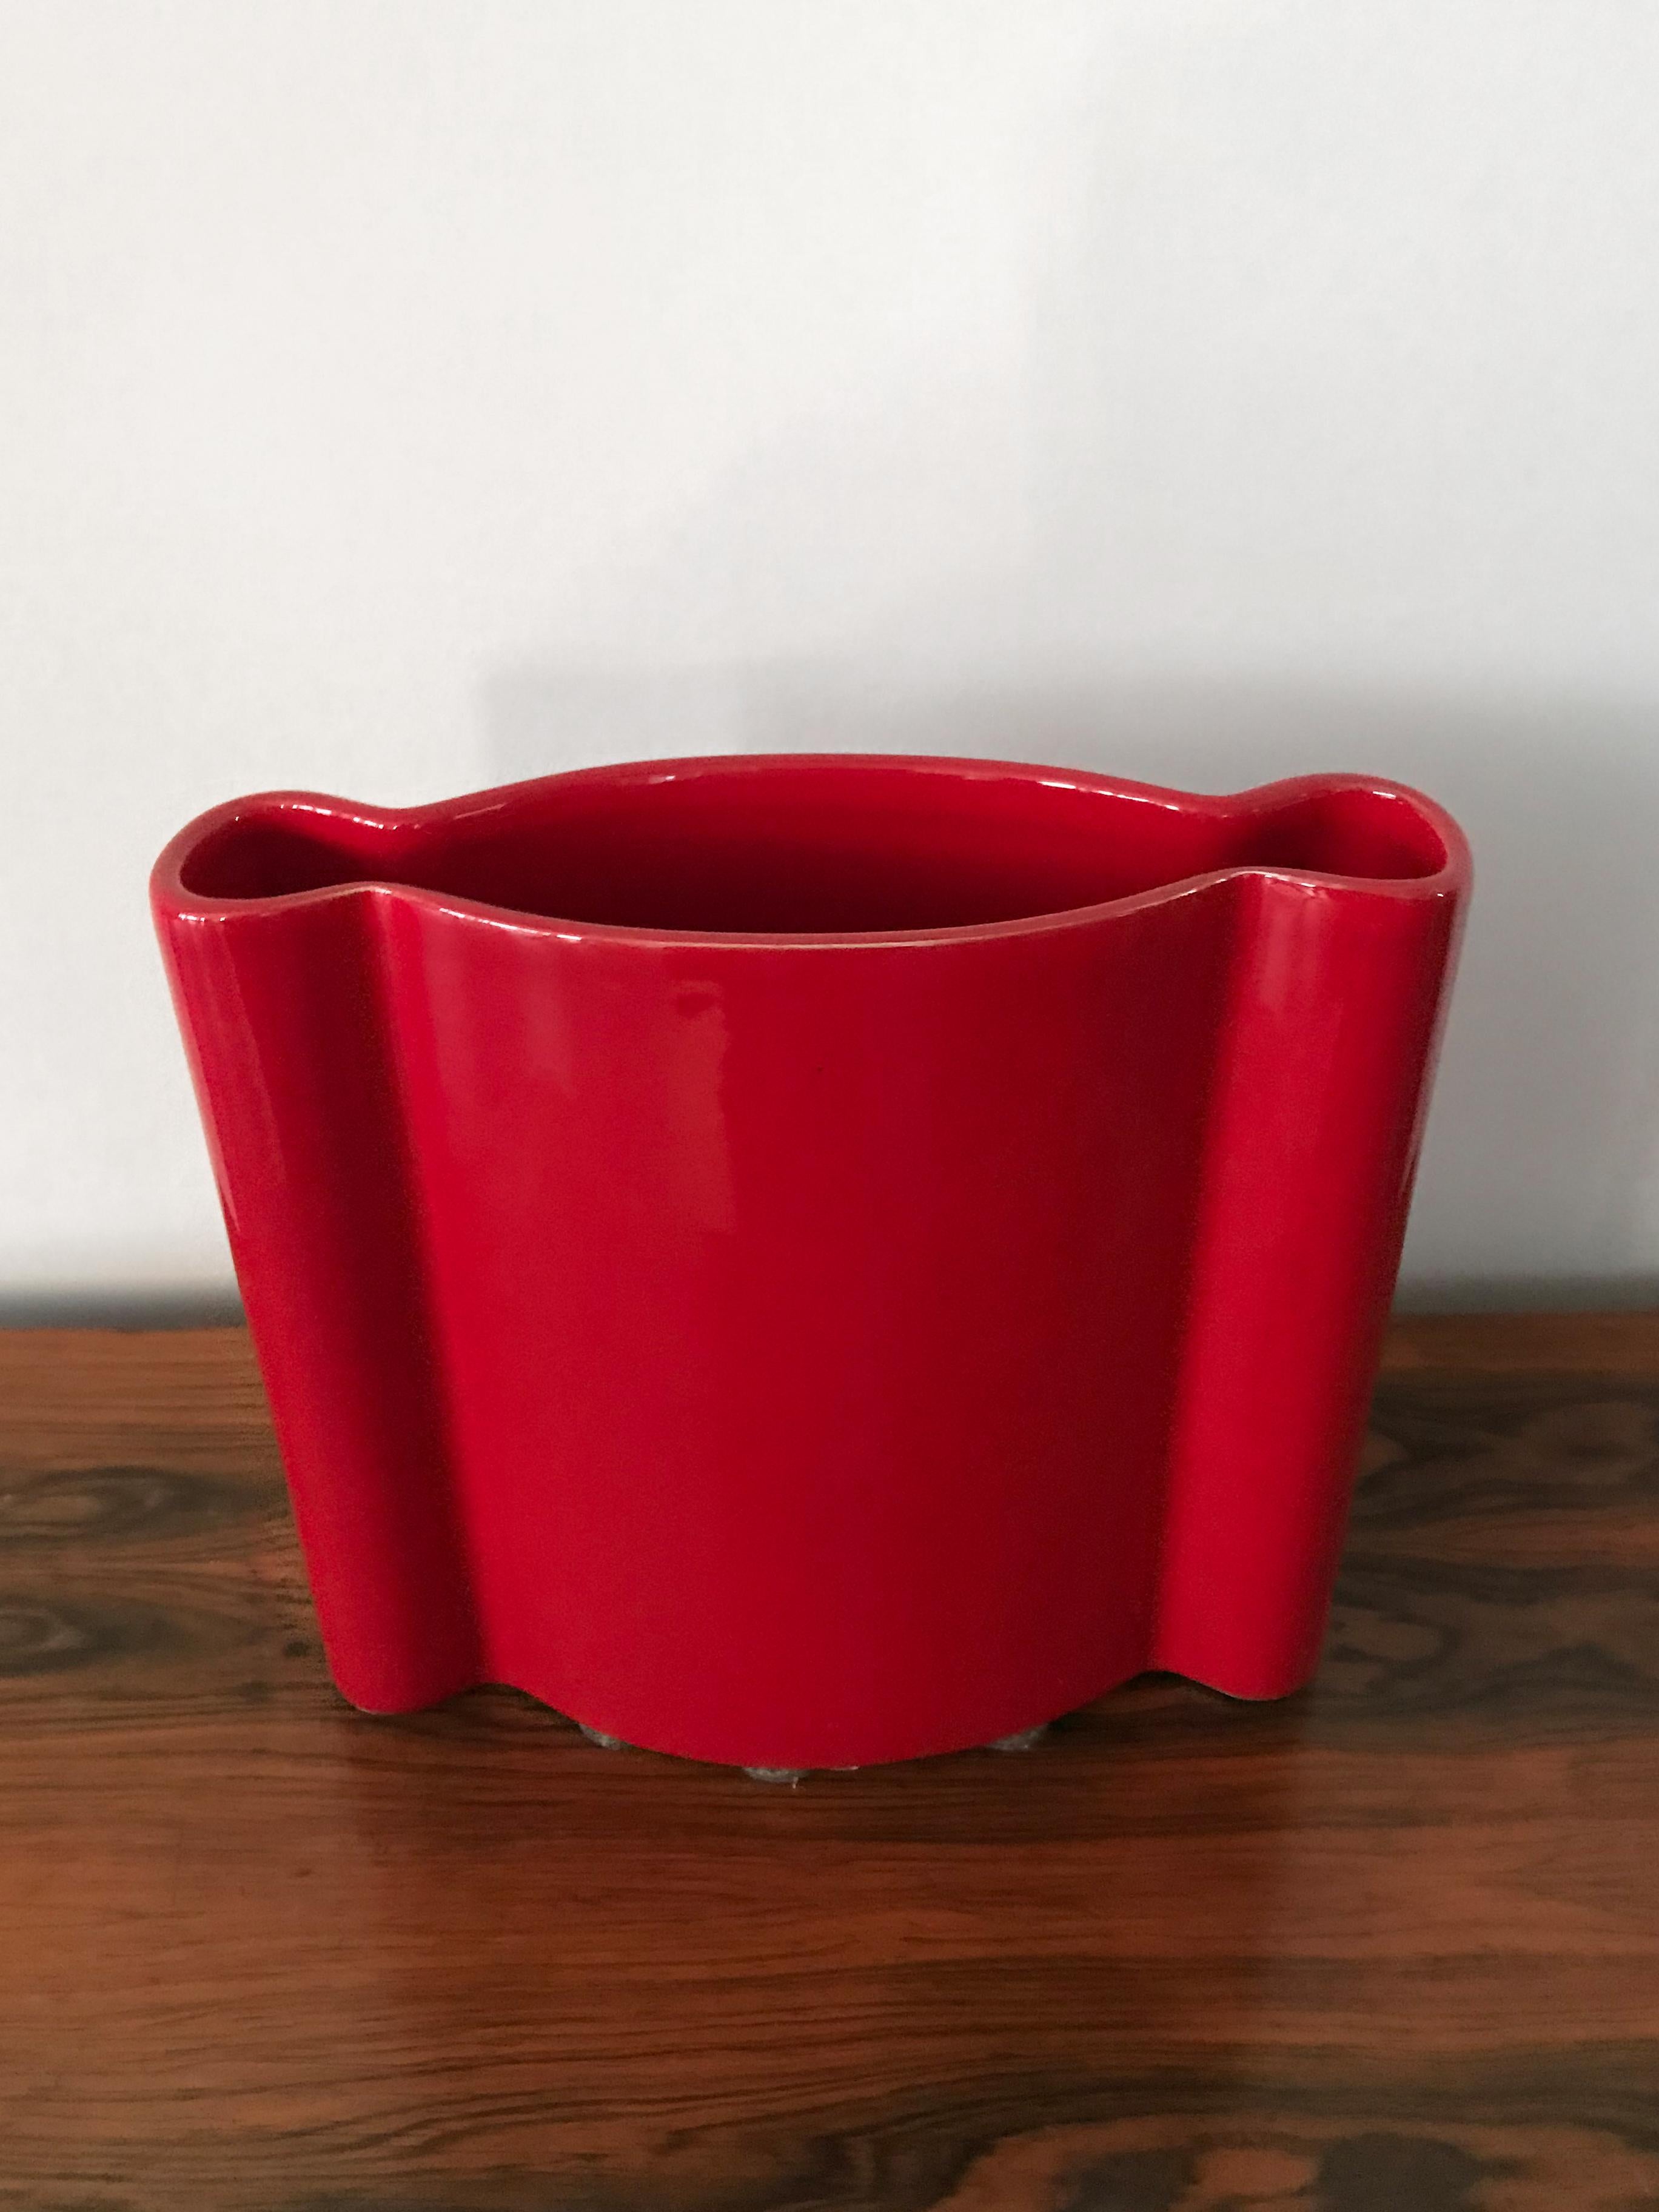 Italian red glazed ceramic vase designed by Angelo Mangiarotti, Superego editions, 2000s
Excellent vintage condition.